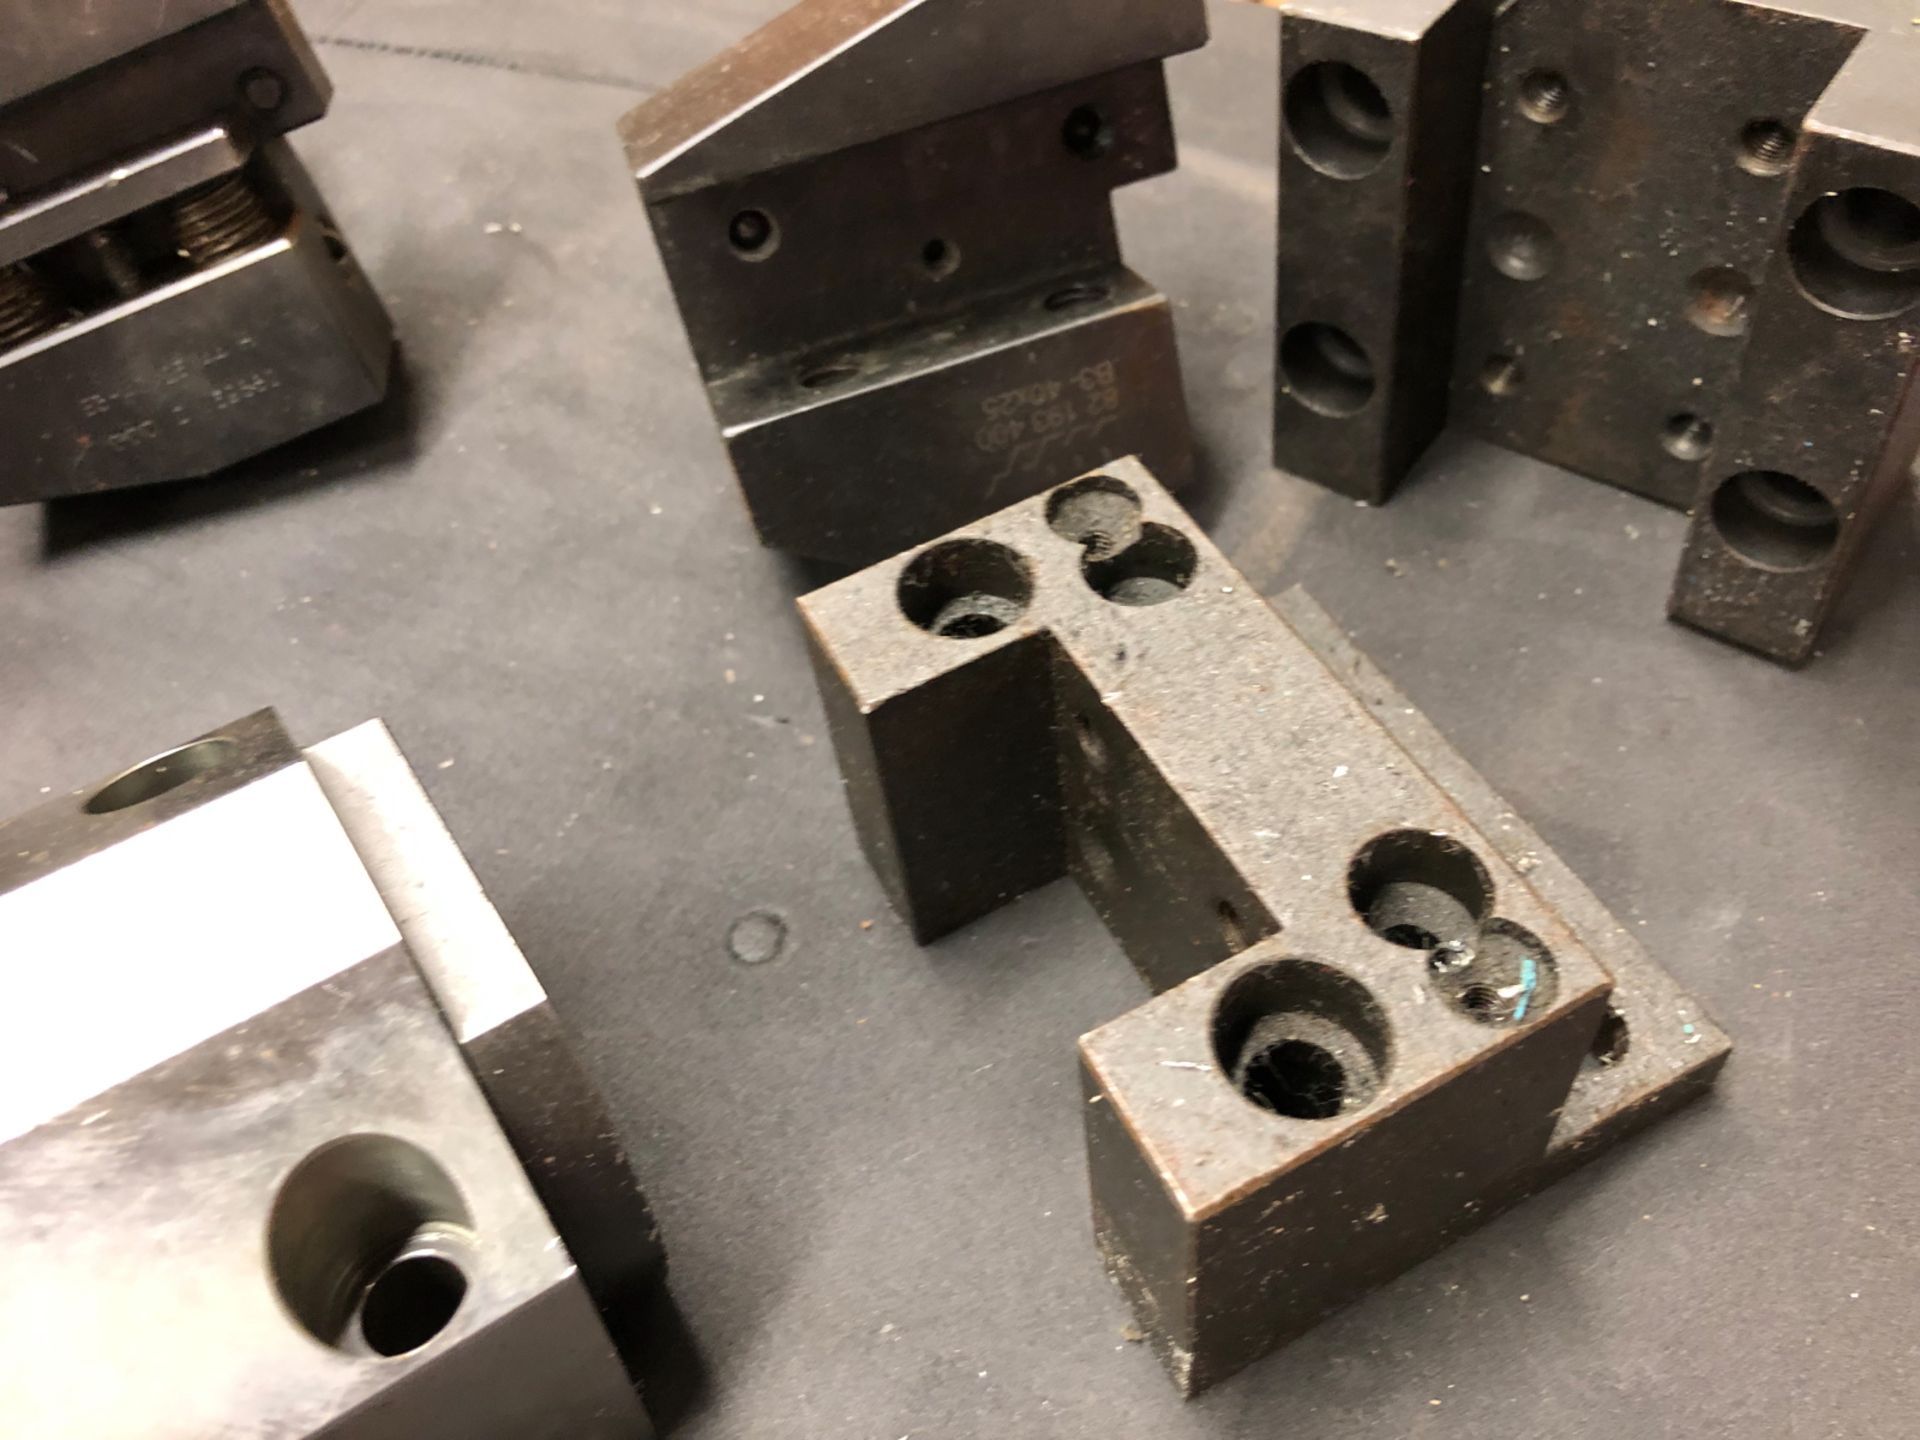 6 VARIOUS CNC TOOL HOLDERS. - Image 4 of 7